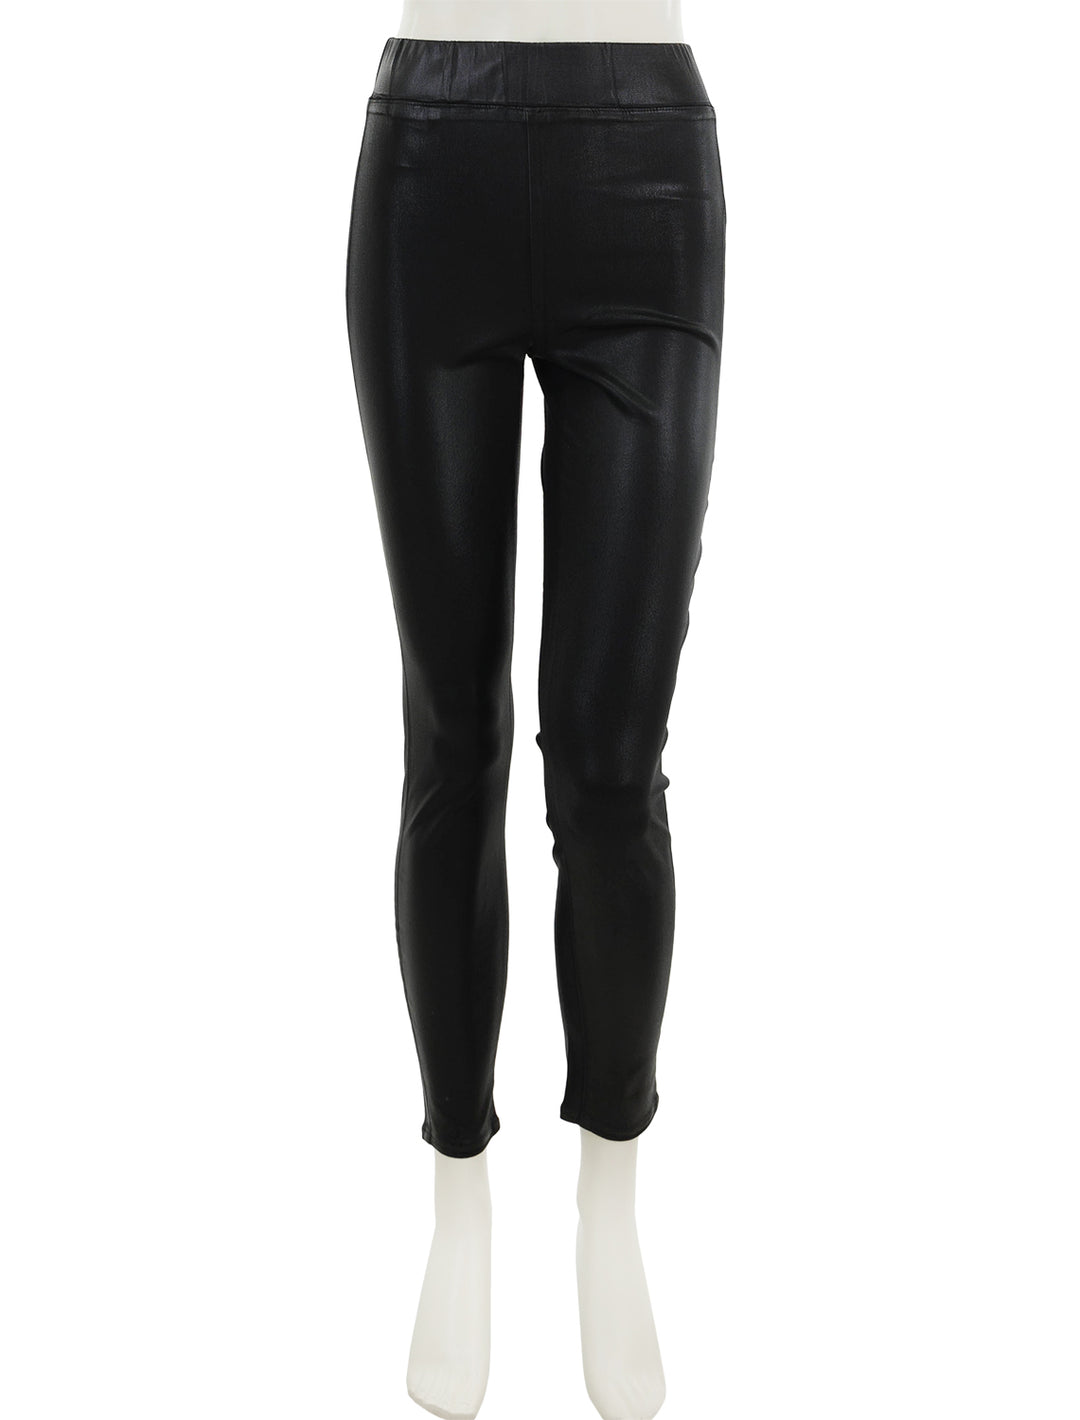 Front view of L'agence's rochelle high rise pull-on jean in noir coated.